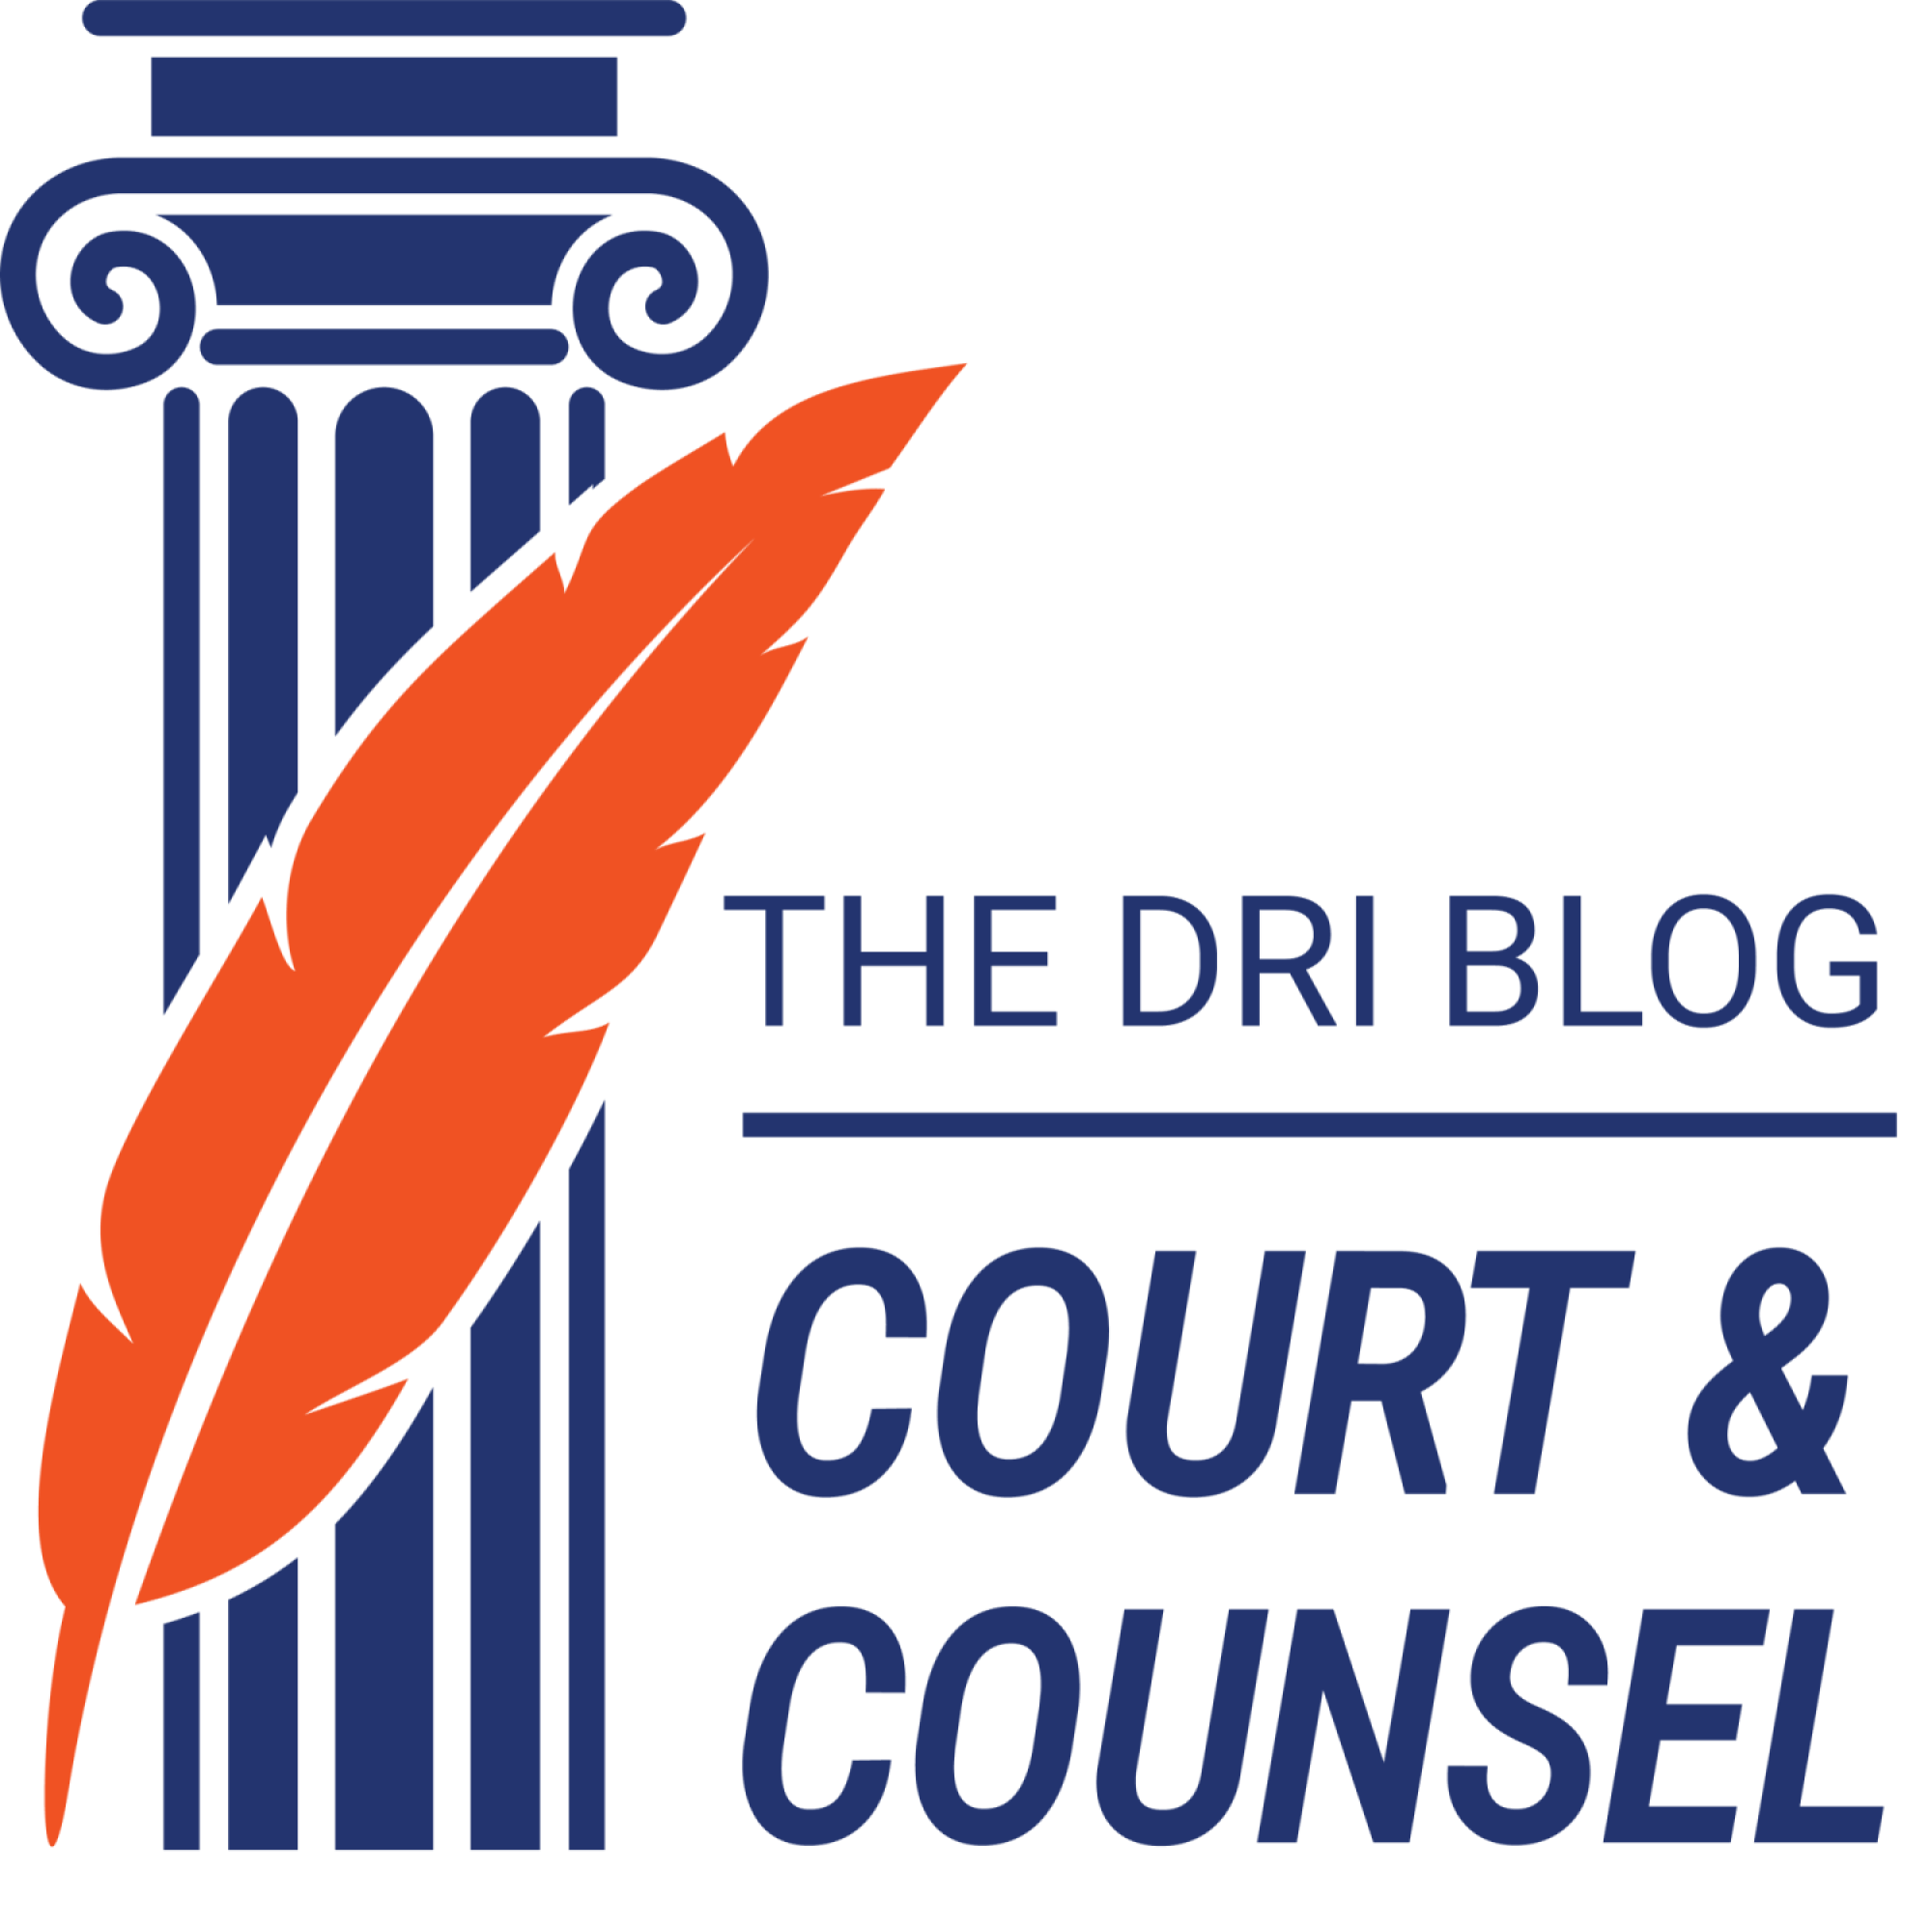 The DRI Blog, Court and Counsel, logo